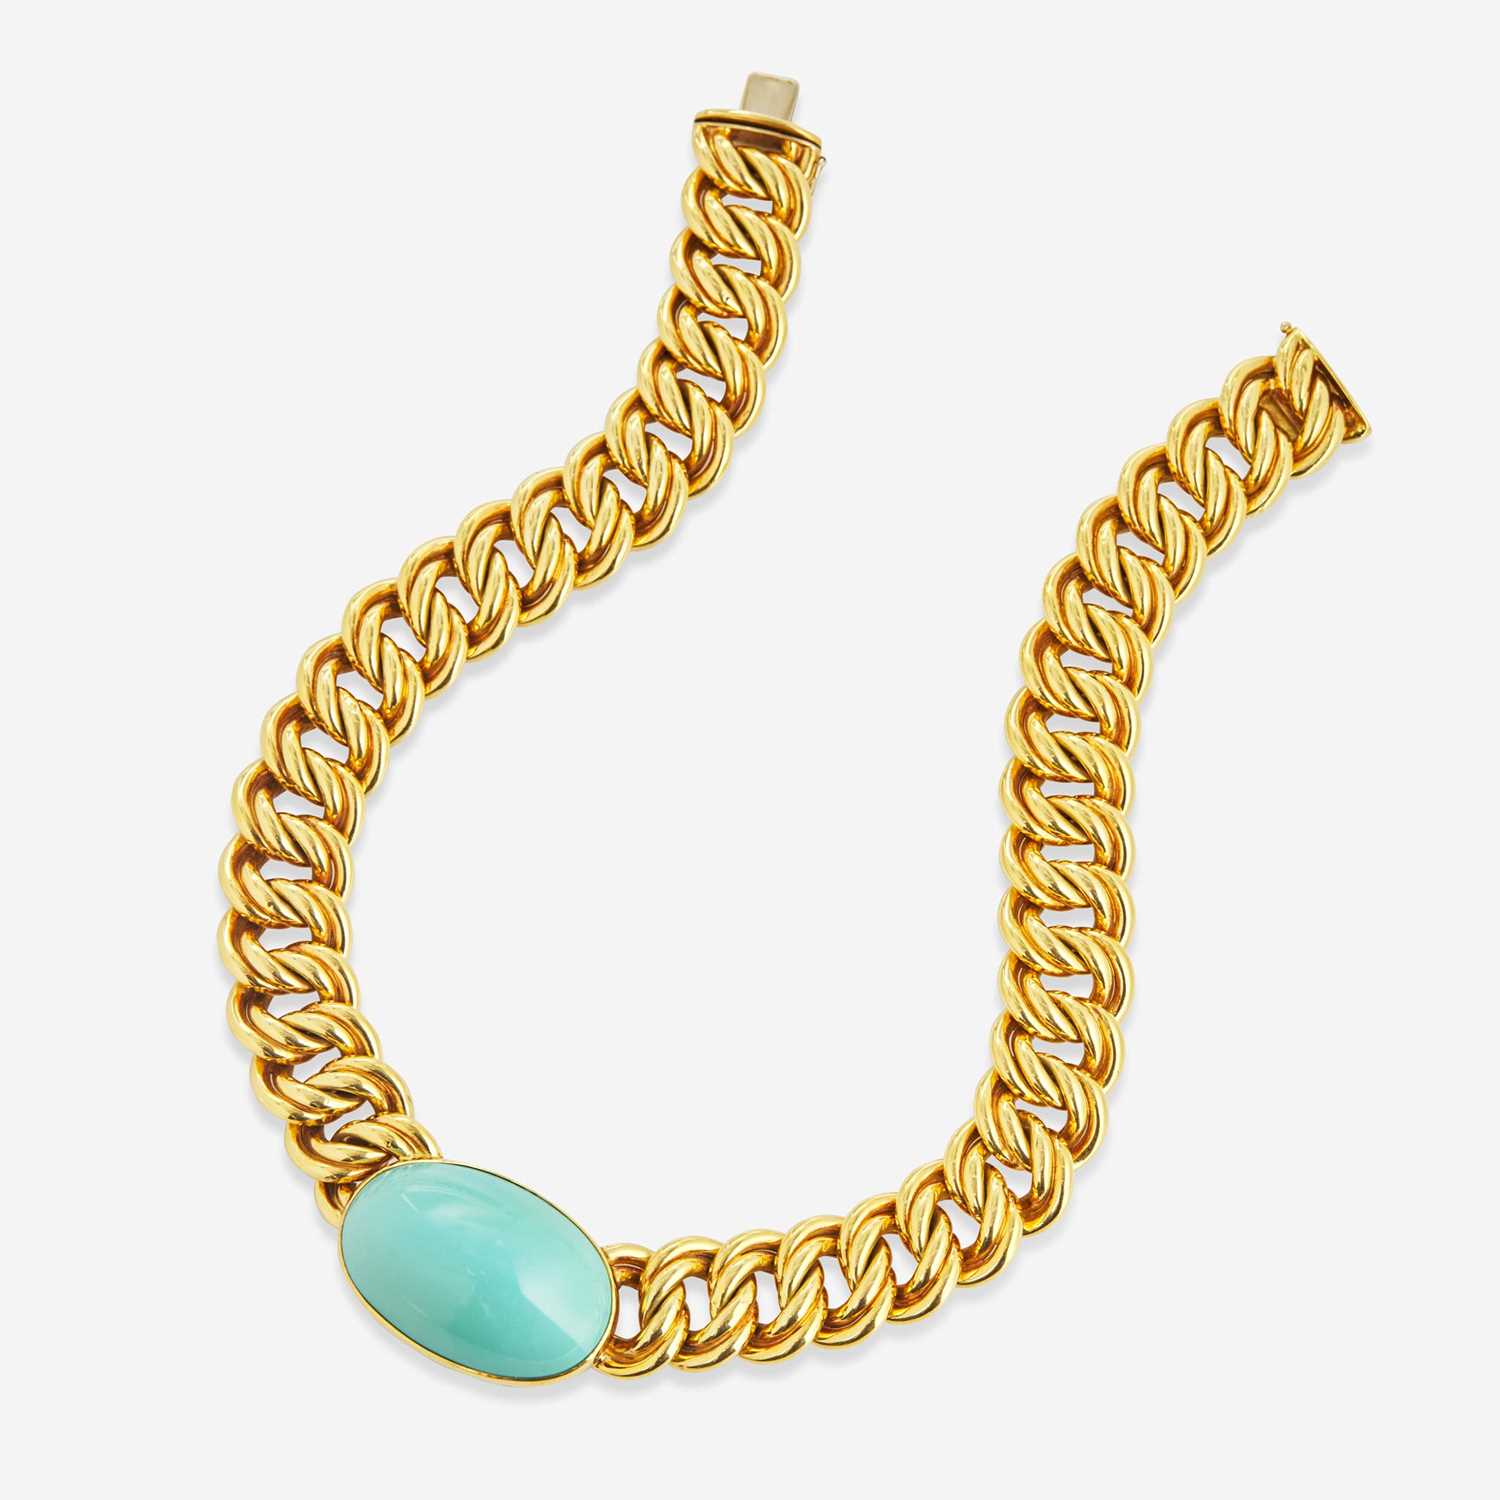 Lot 39 - An 18K Yellow Gold and Turquoise Necklace